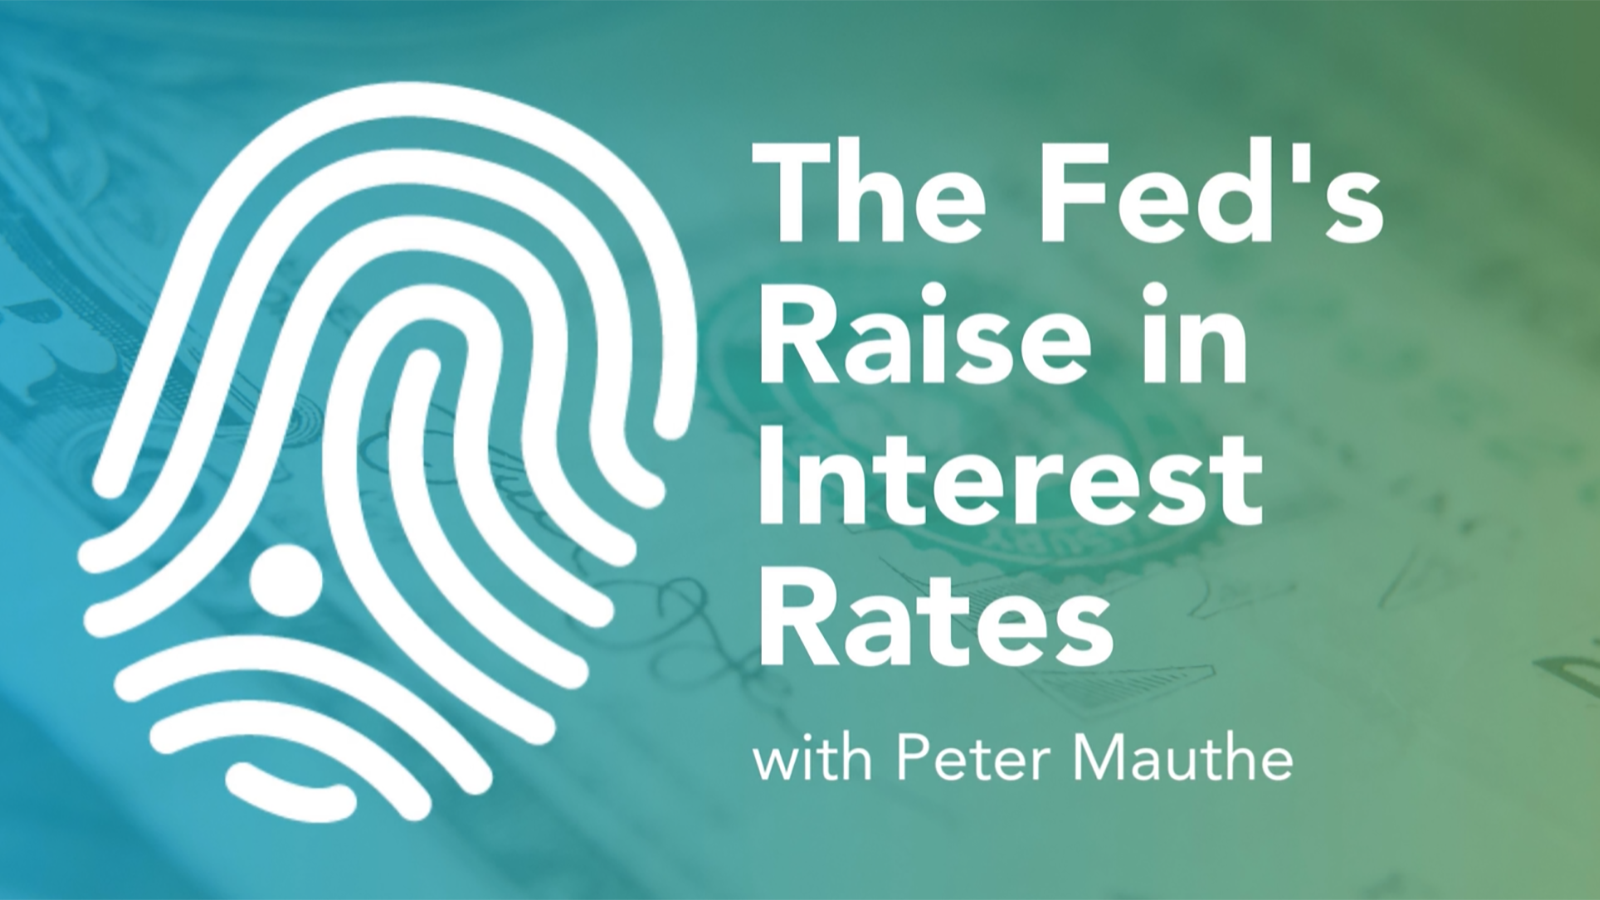 The Fed’s Raise in Interest Rates